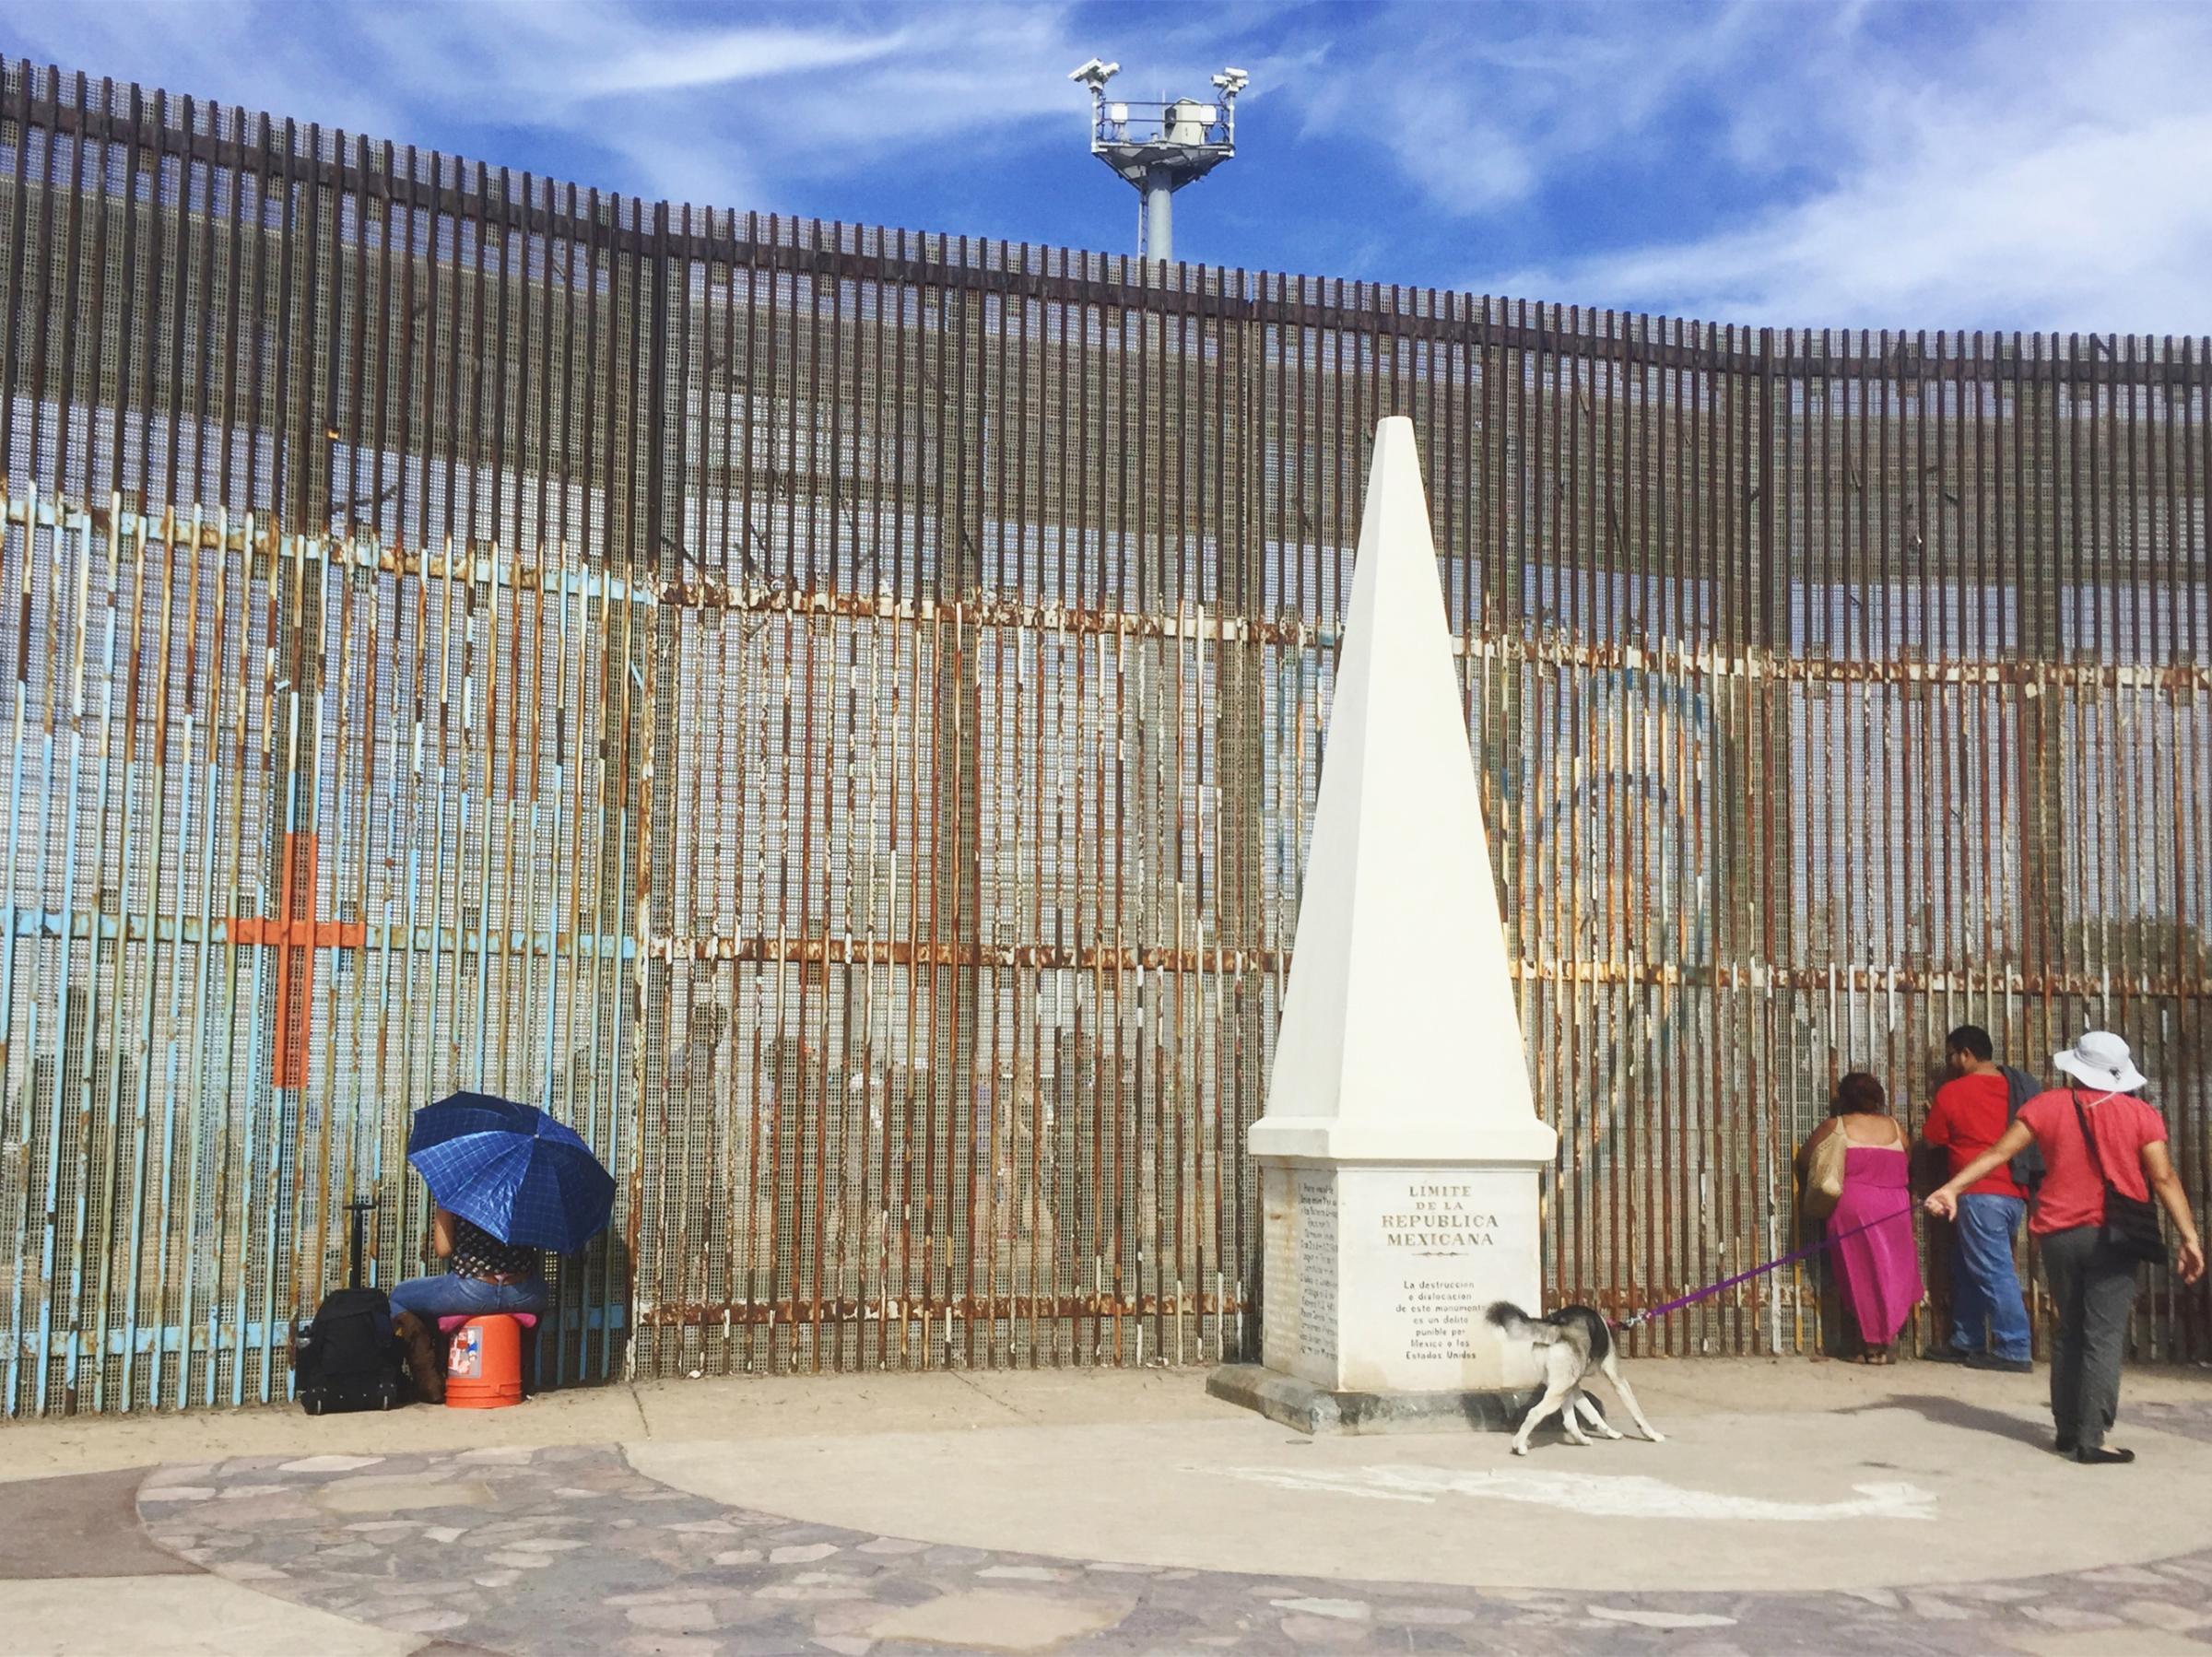 People connecting with their loved ones through the border fence in Tijuana on the U.S.-Mexico border by the last border monument under the U.S. surveillance cameras. Nov. 2016.